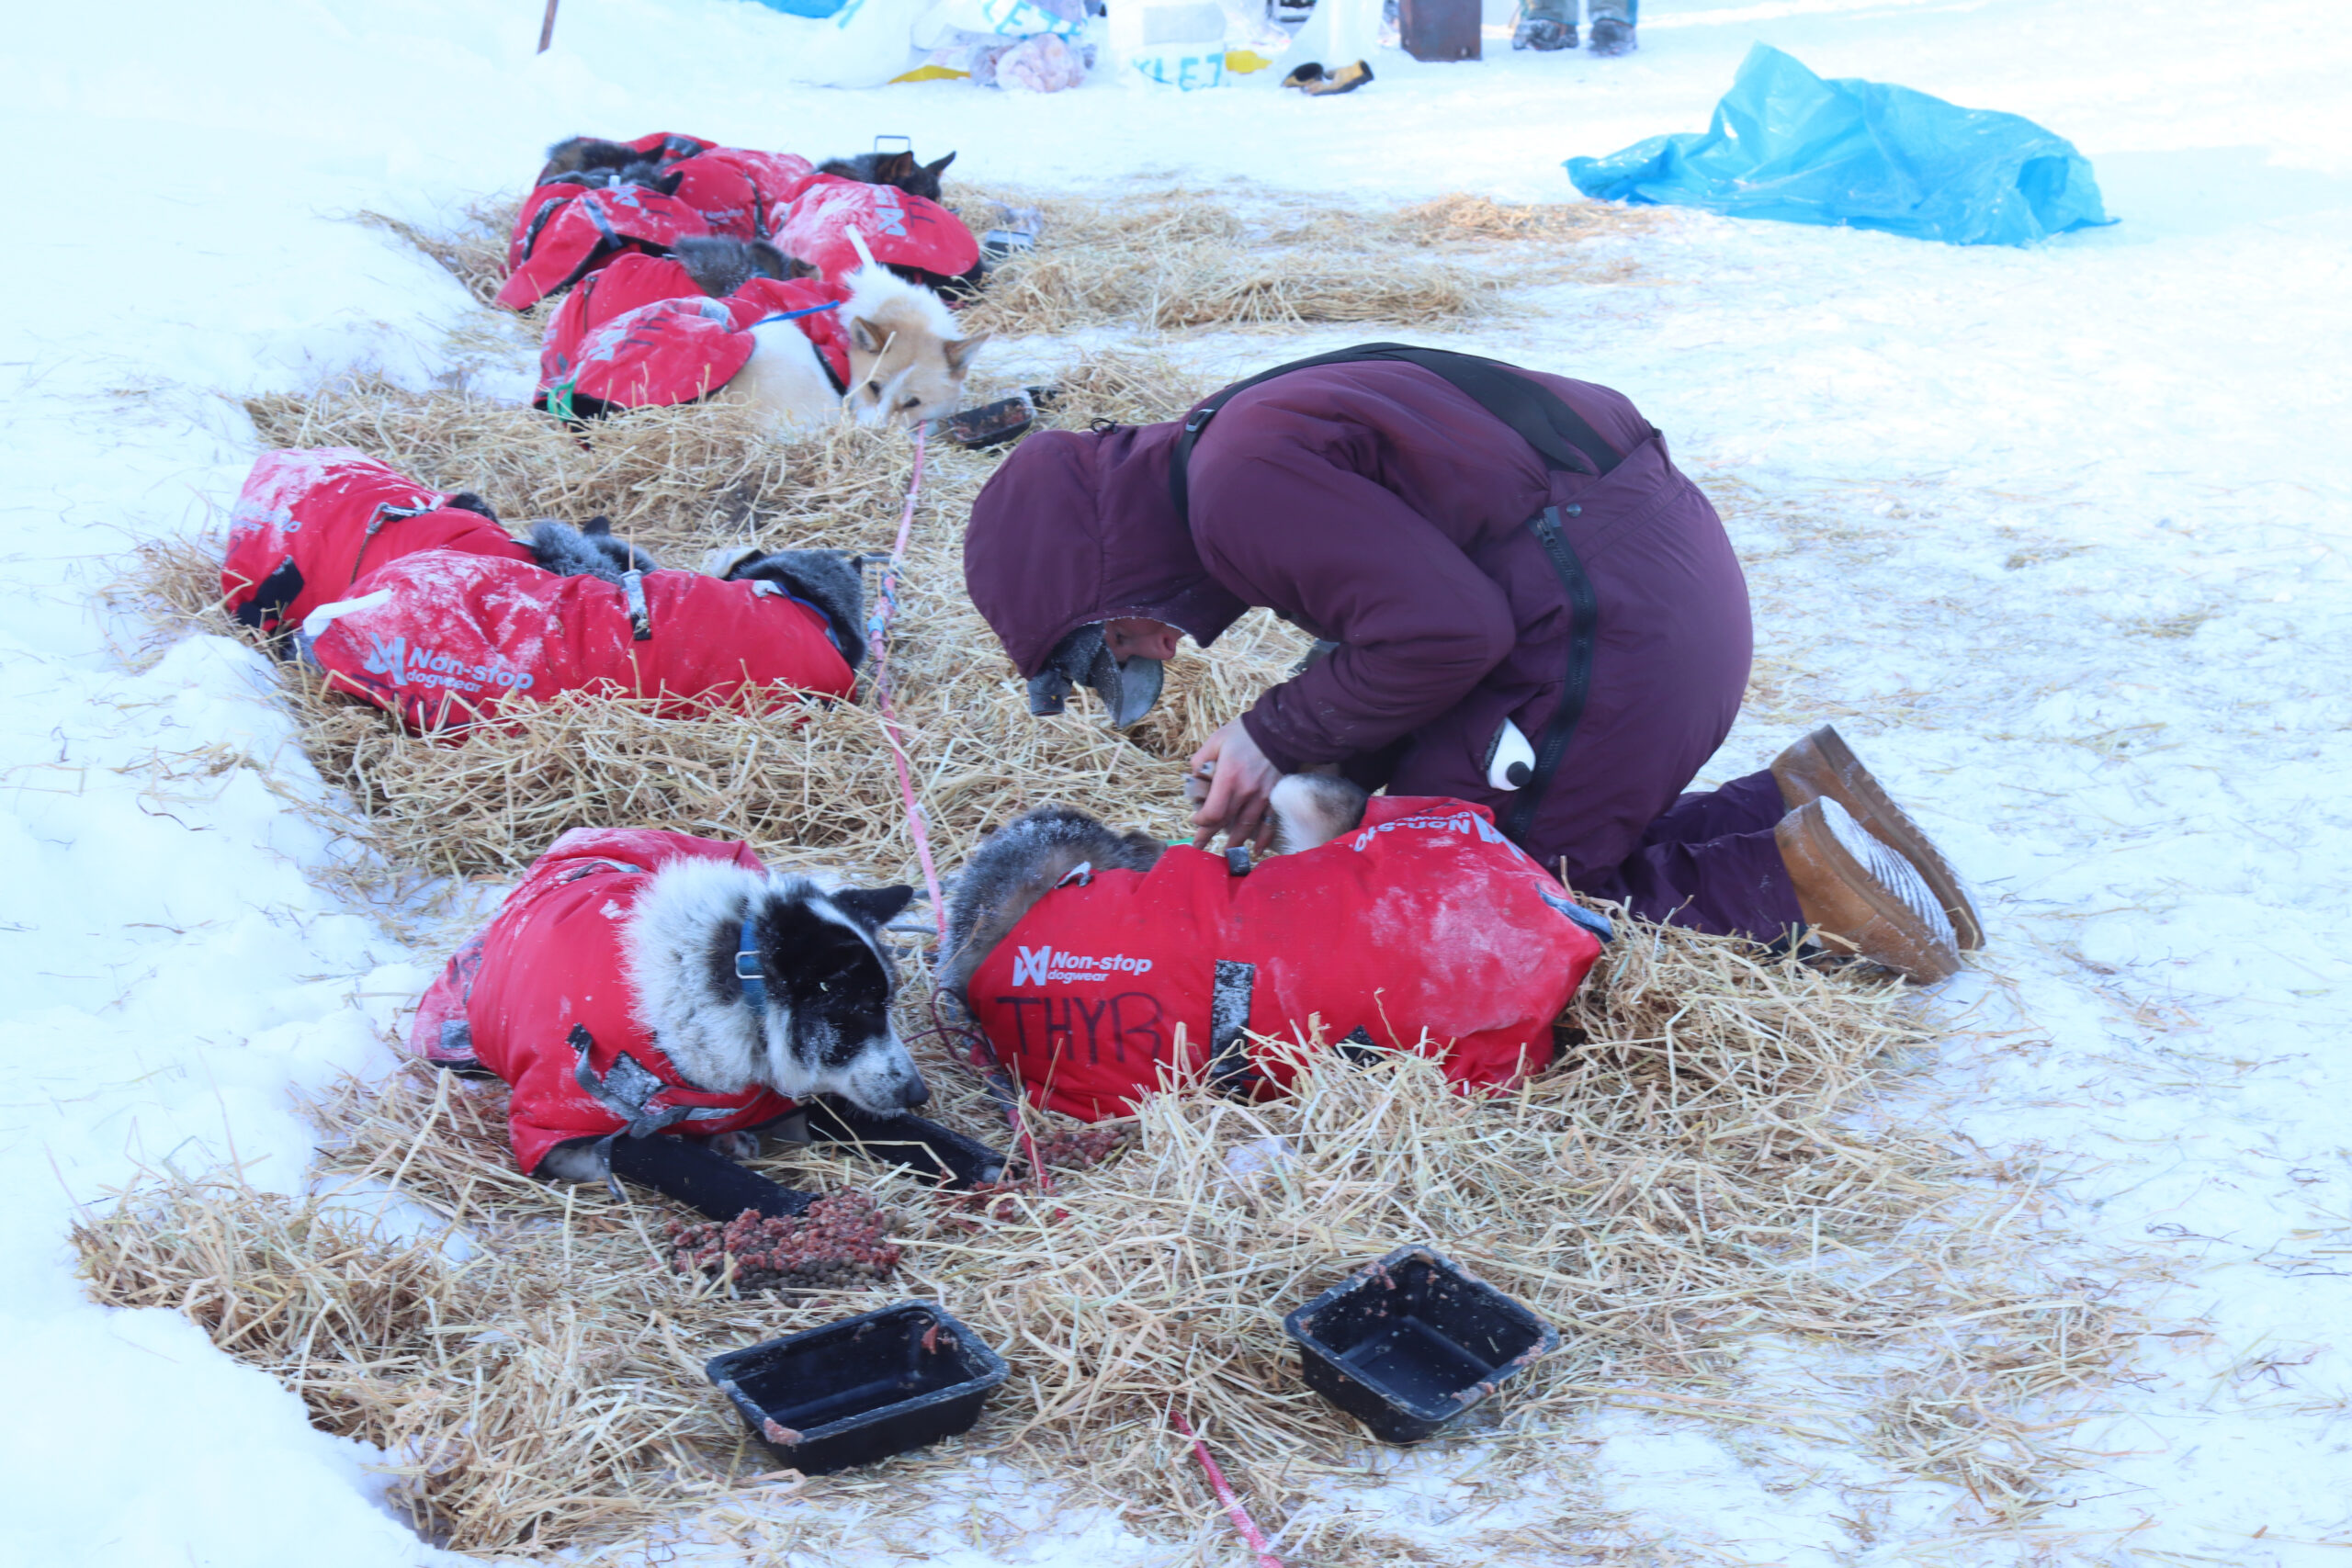 a musher putting foot ointment on their dogs outside, the dogs are wearing red coats